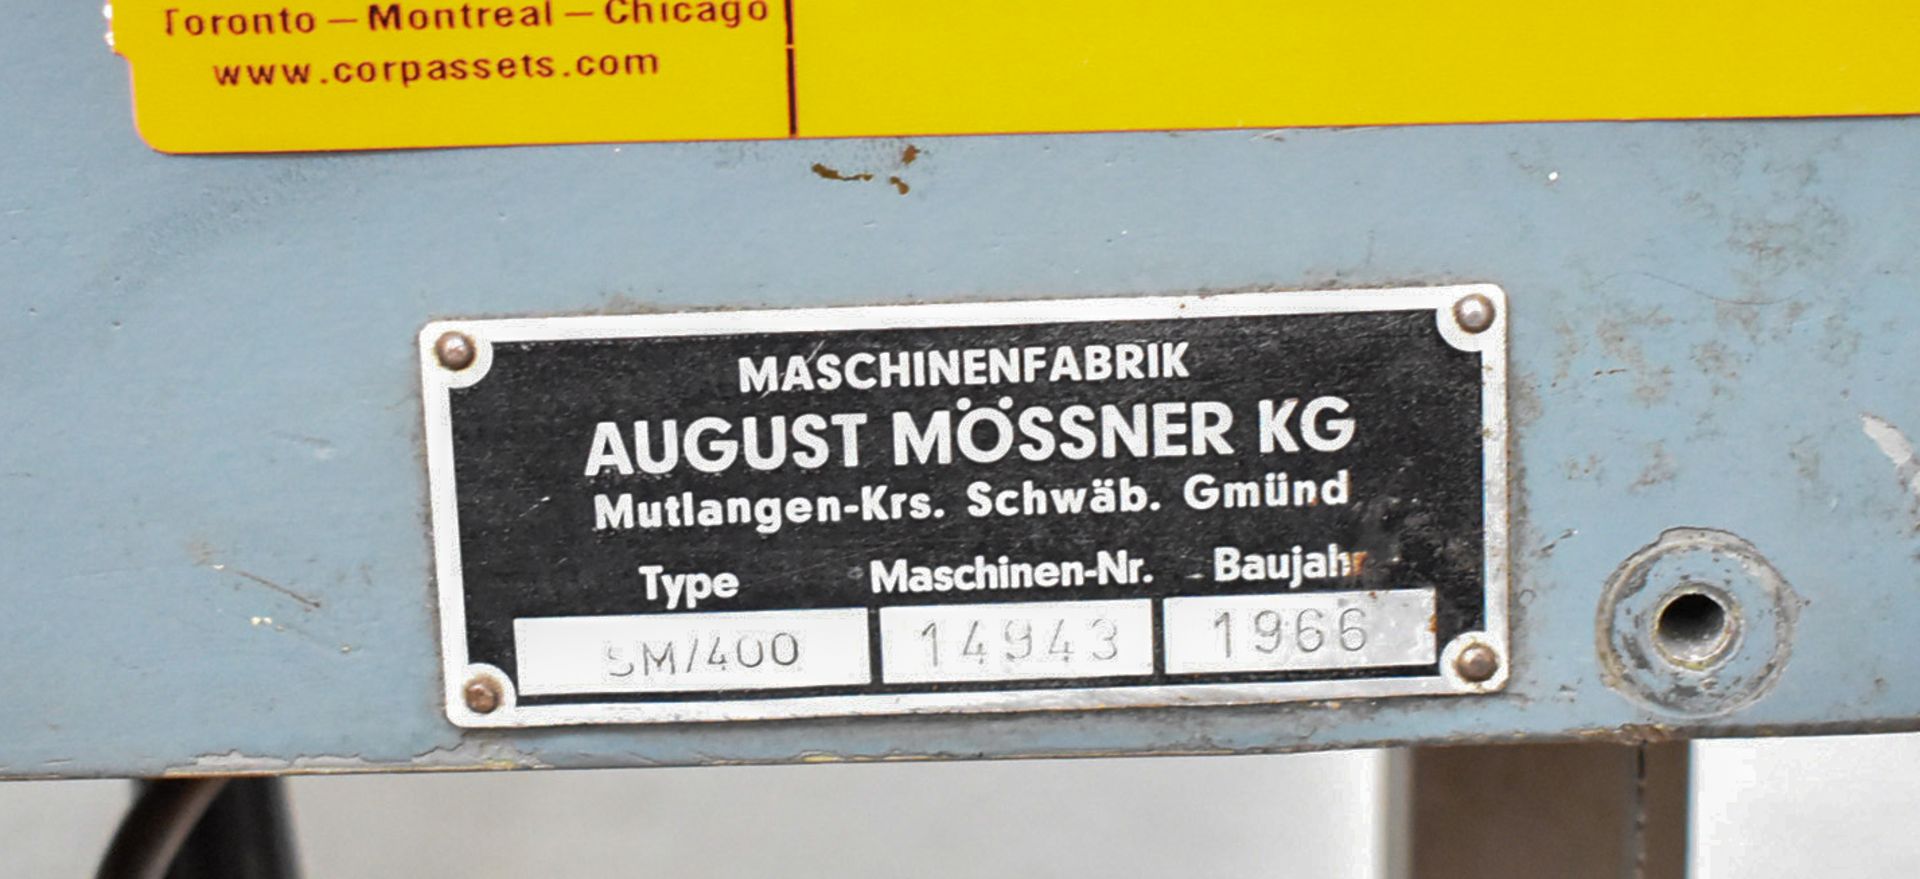 MOSSNER SN/400 VERTICAL BAND SAW - Image 2 of 3